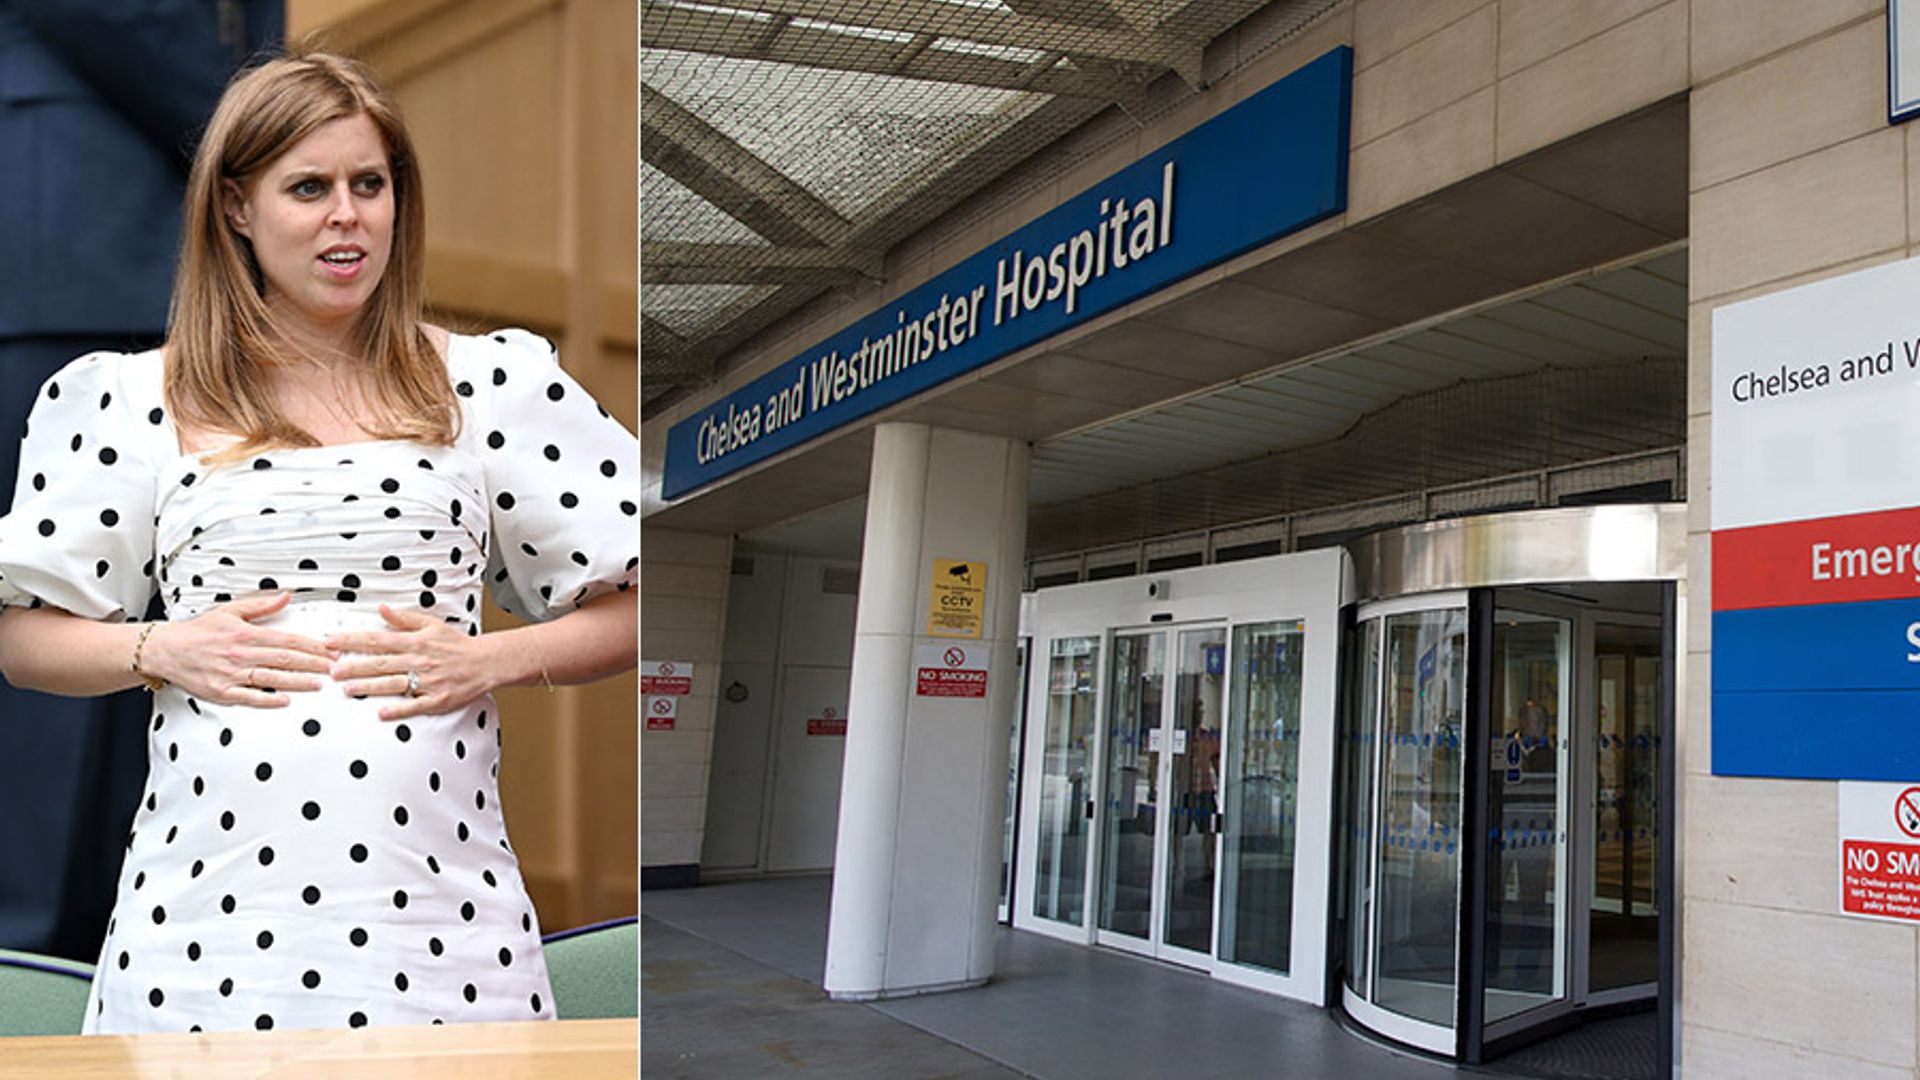 Everything you need to know about the London hospital where Princess Beatrice gave birth